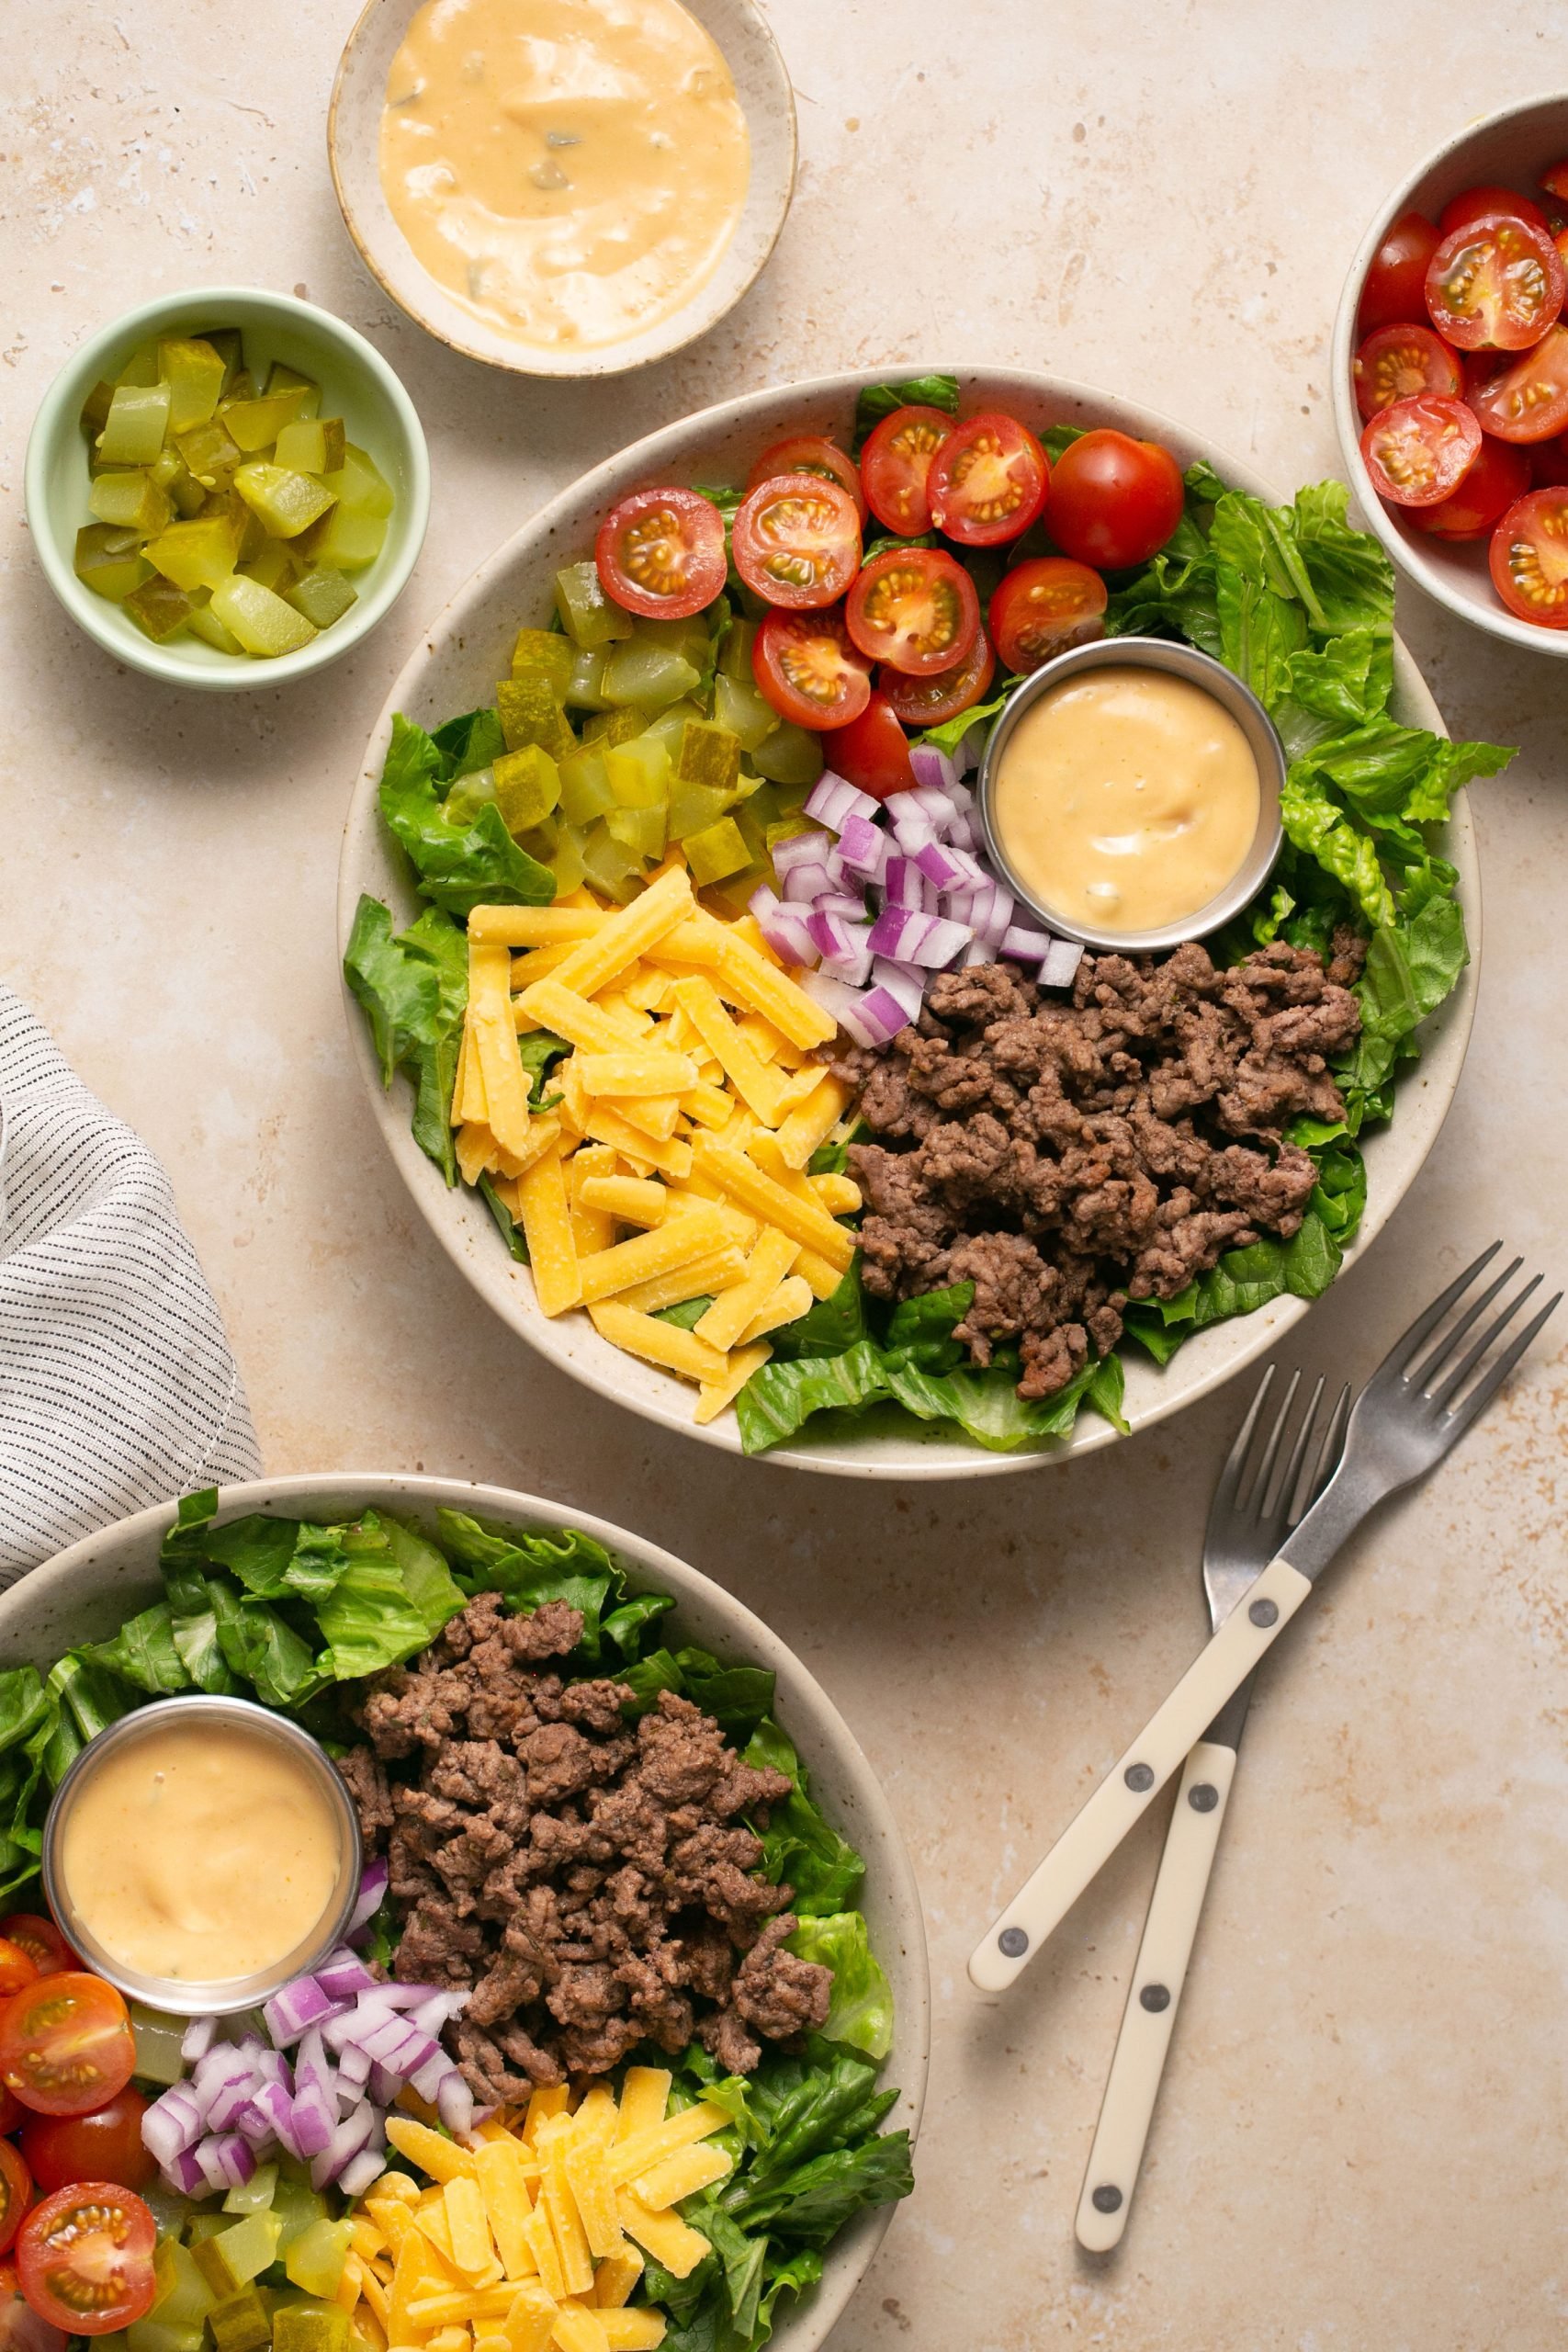 Cheeseburger salads assembled in two bowls on a table with a stripped napkin and two forks. There are small bowls of ingredients on the table too.